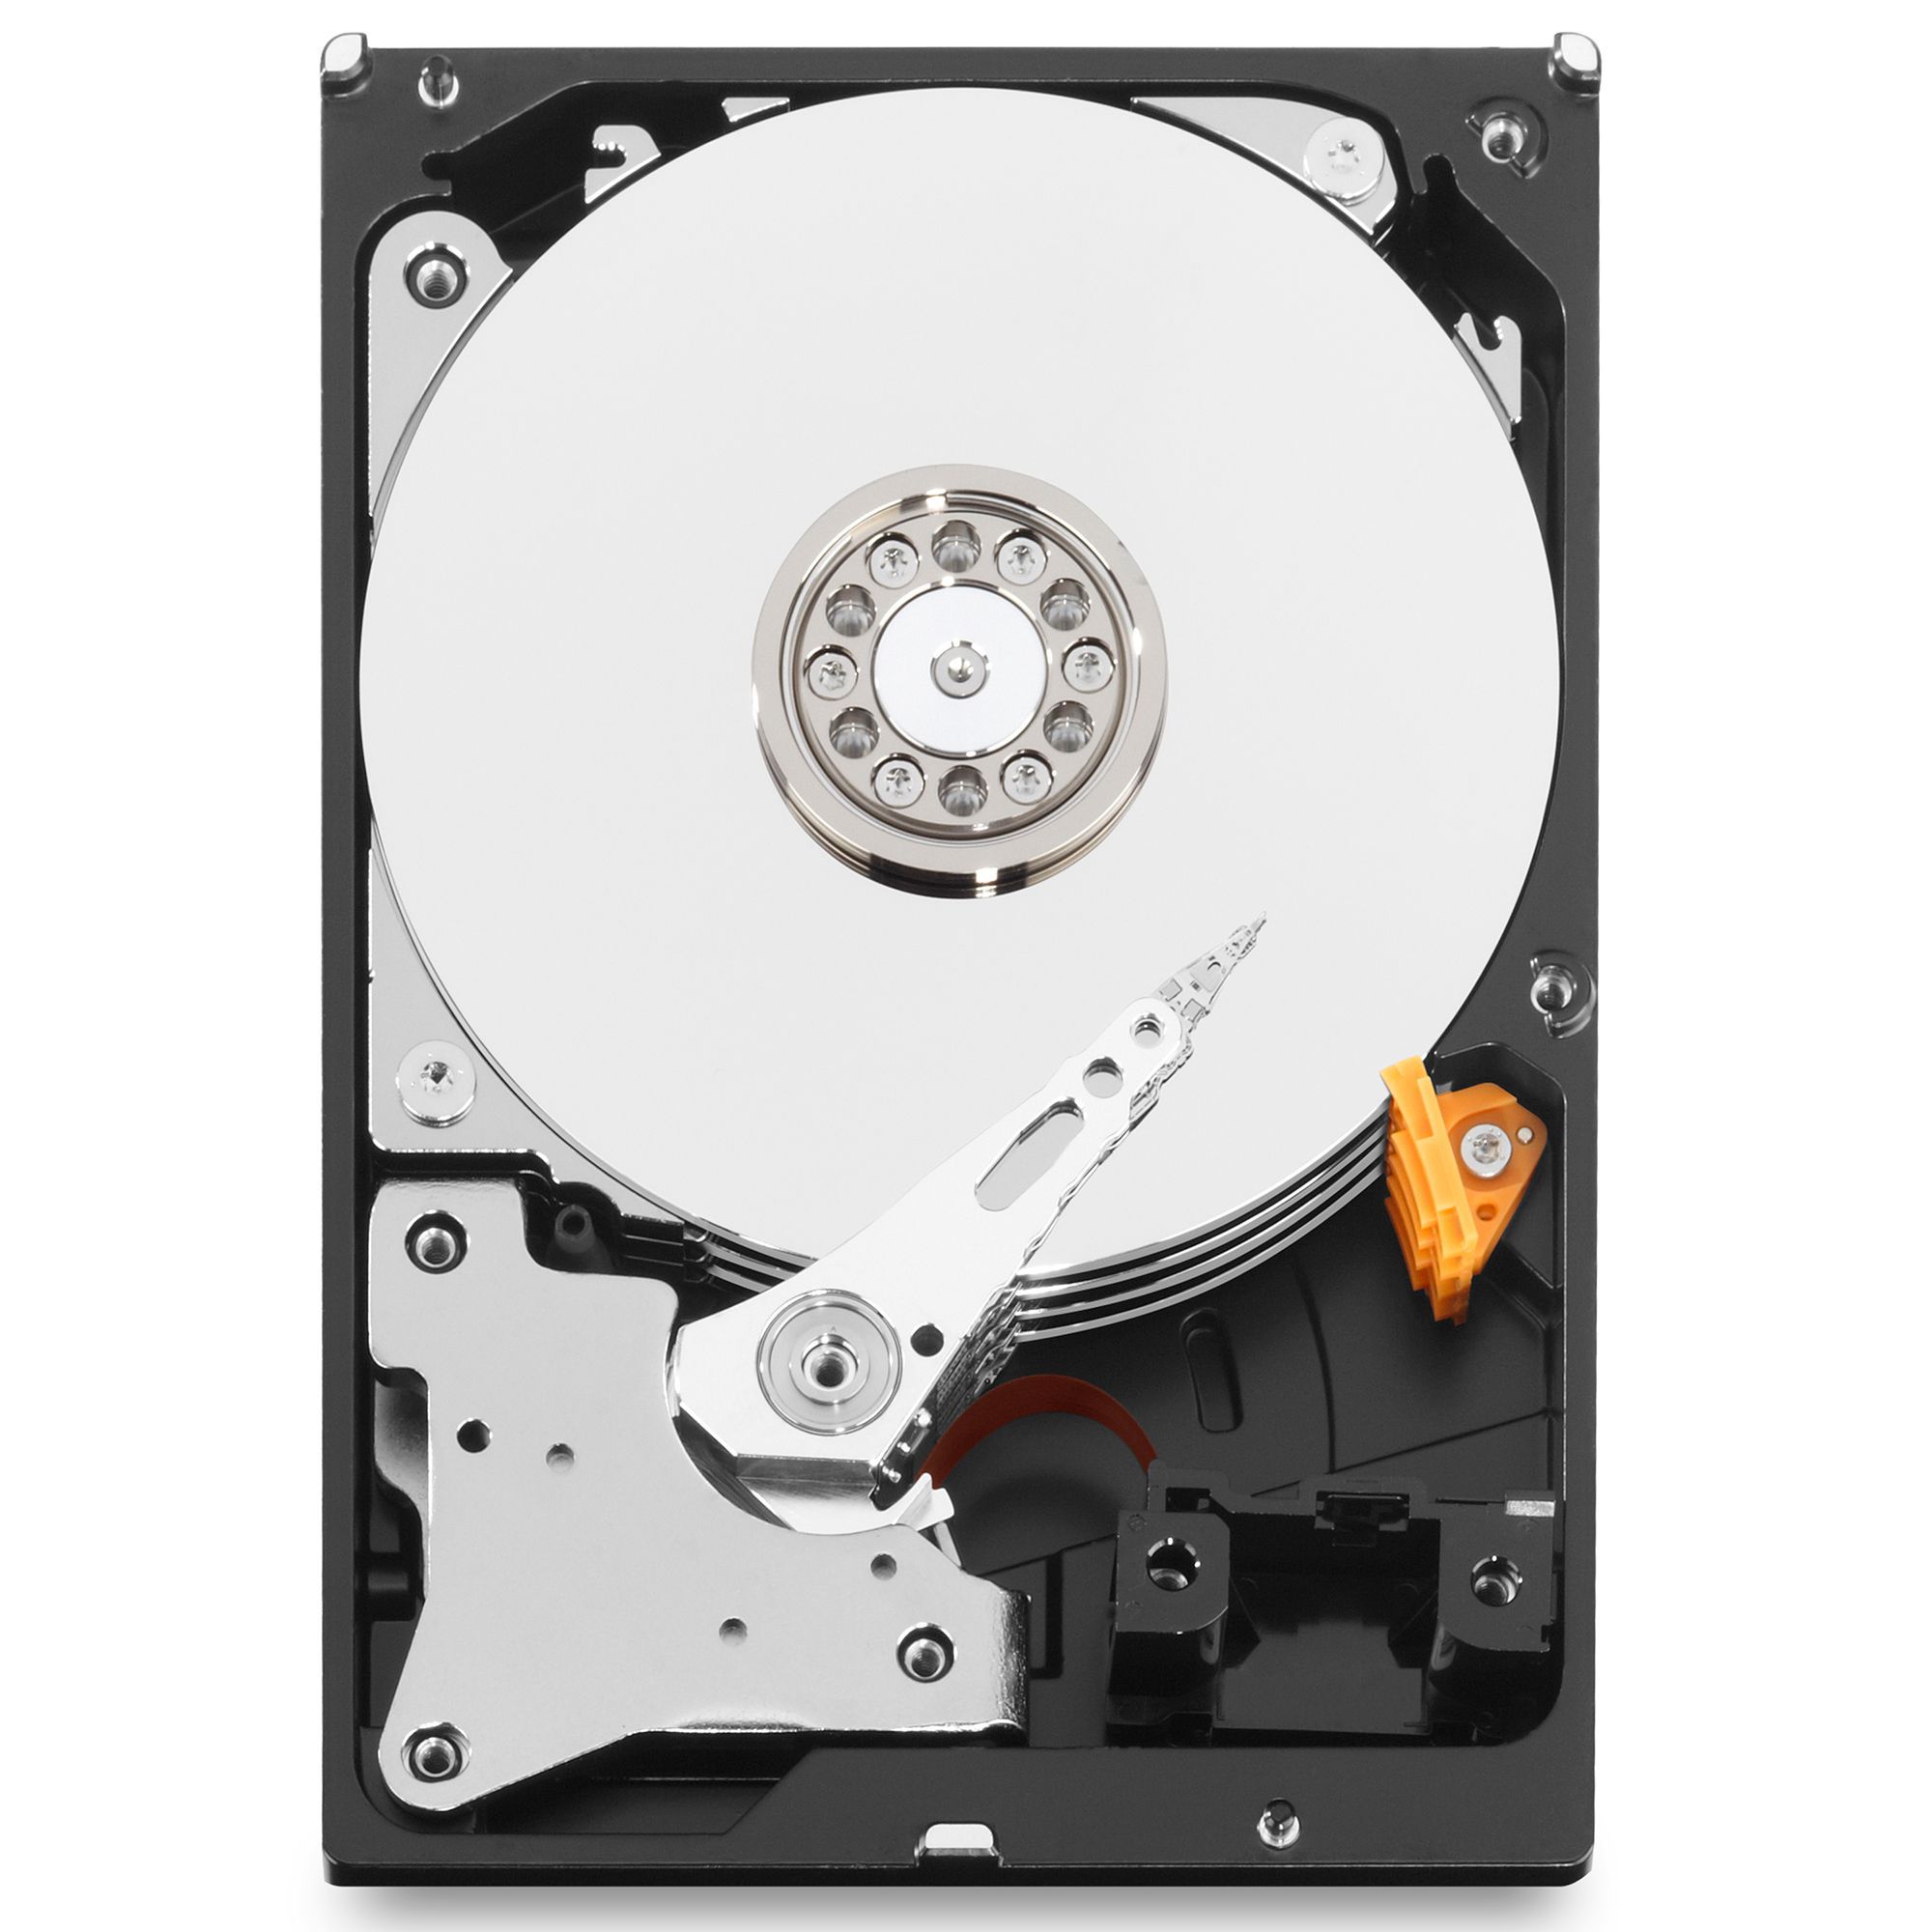 WD Red Plus 1TB SATA 6Gb/s 2.5inch 16MB Cache IntelliPower Internal 24x7 optimized for SOHO NAS systems NASware HDD Bulk_4